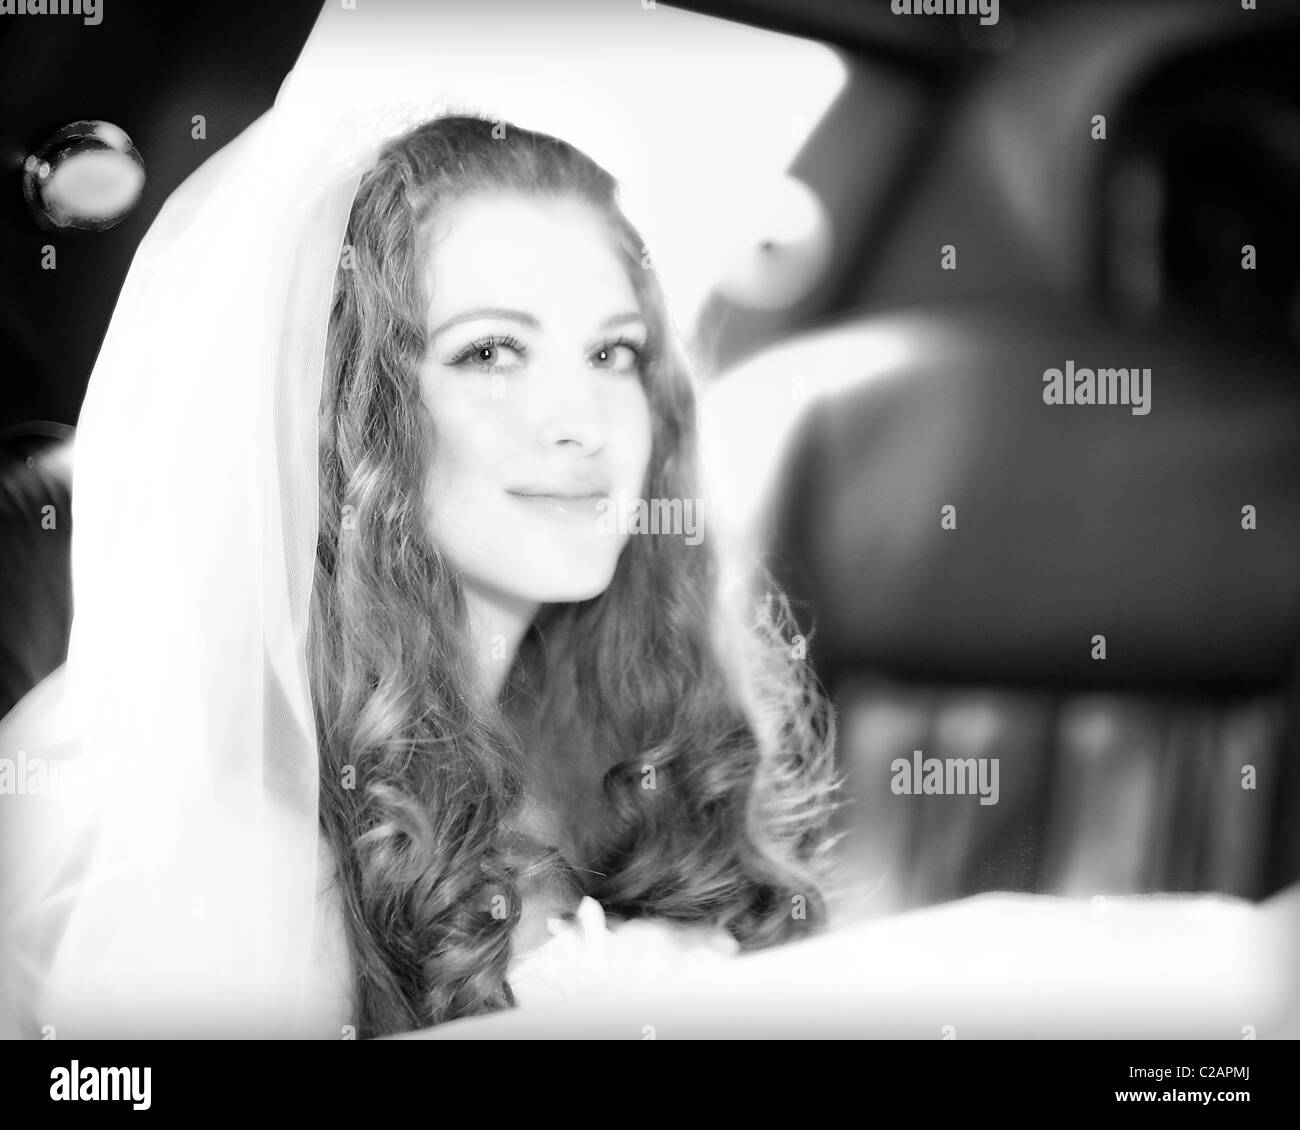 Young red hair bride in the limo on her way to the ceremony. Model release signed. Stock Photo